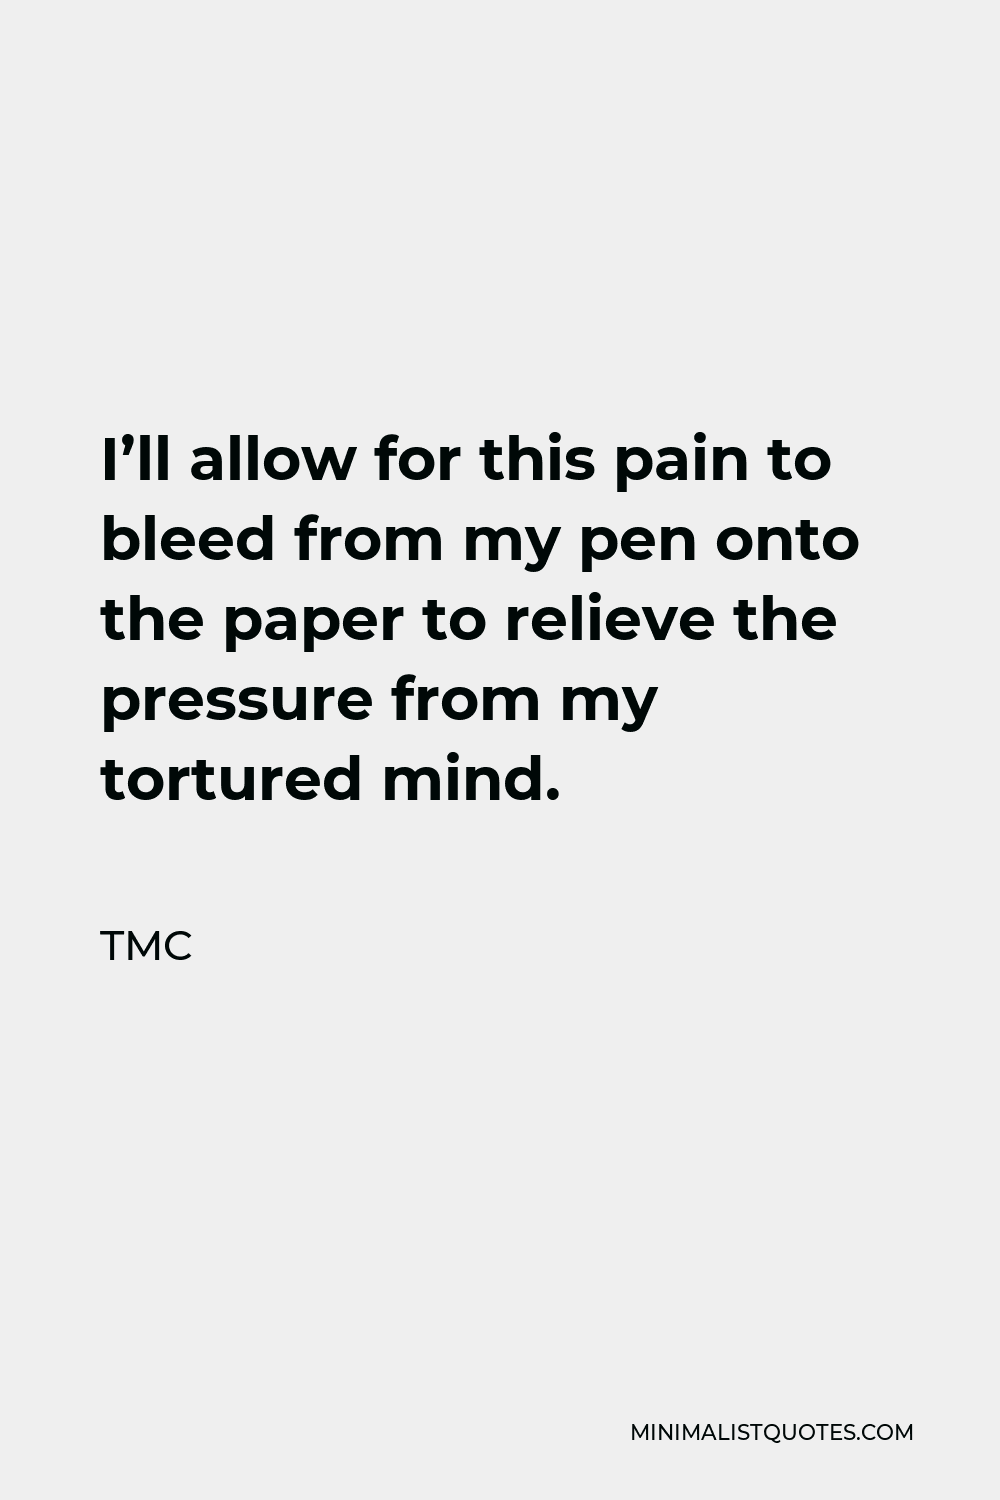 TMC Quote - I’ll allow for this pain to bleed from my pen onto the paper to relieve the pressure from my tortured mind.